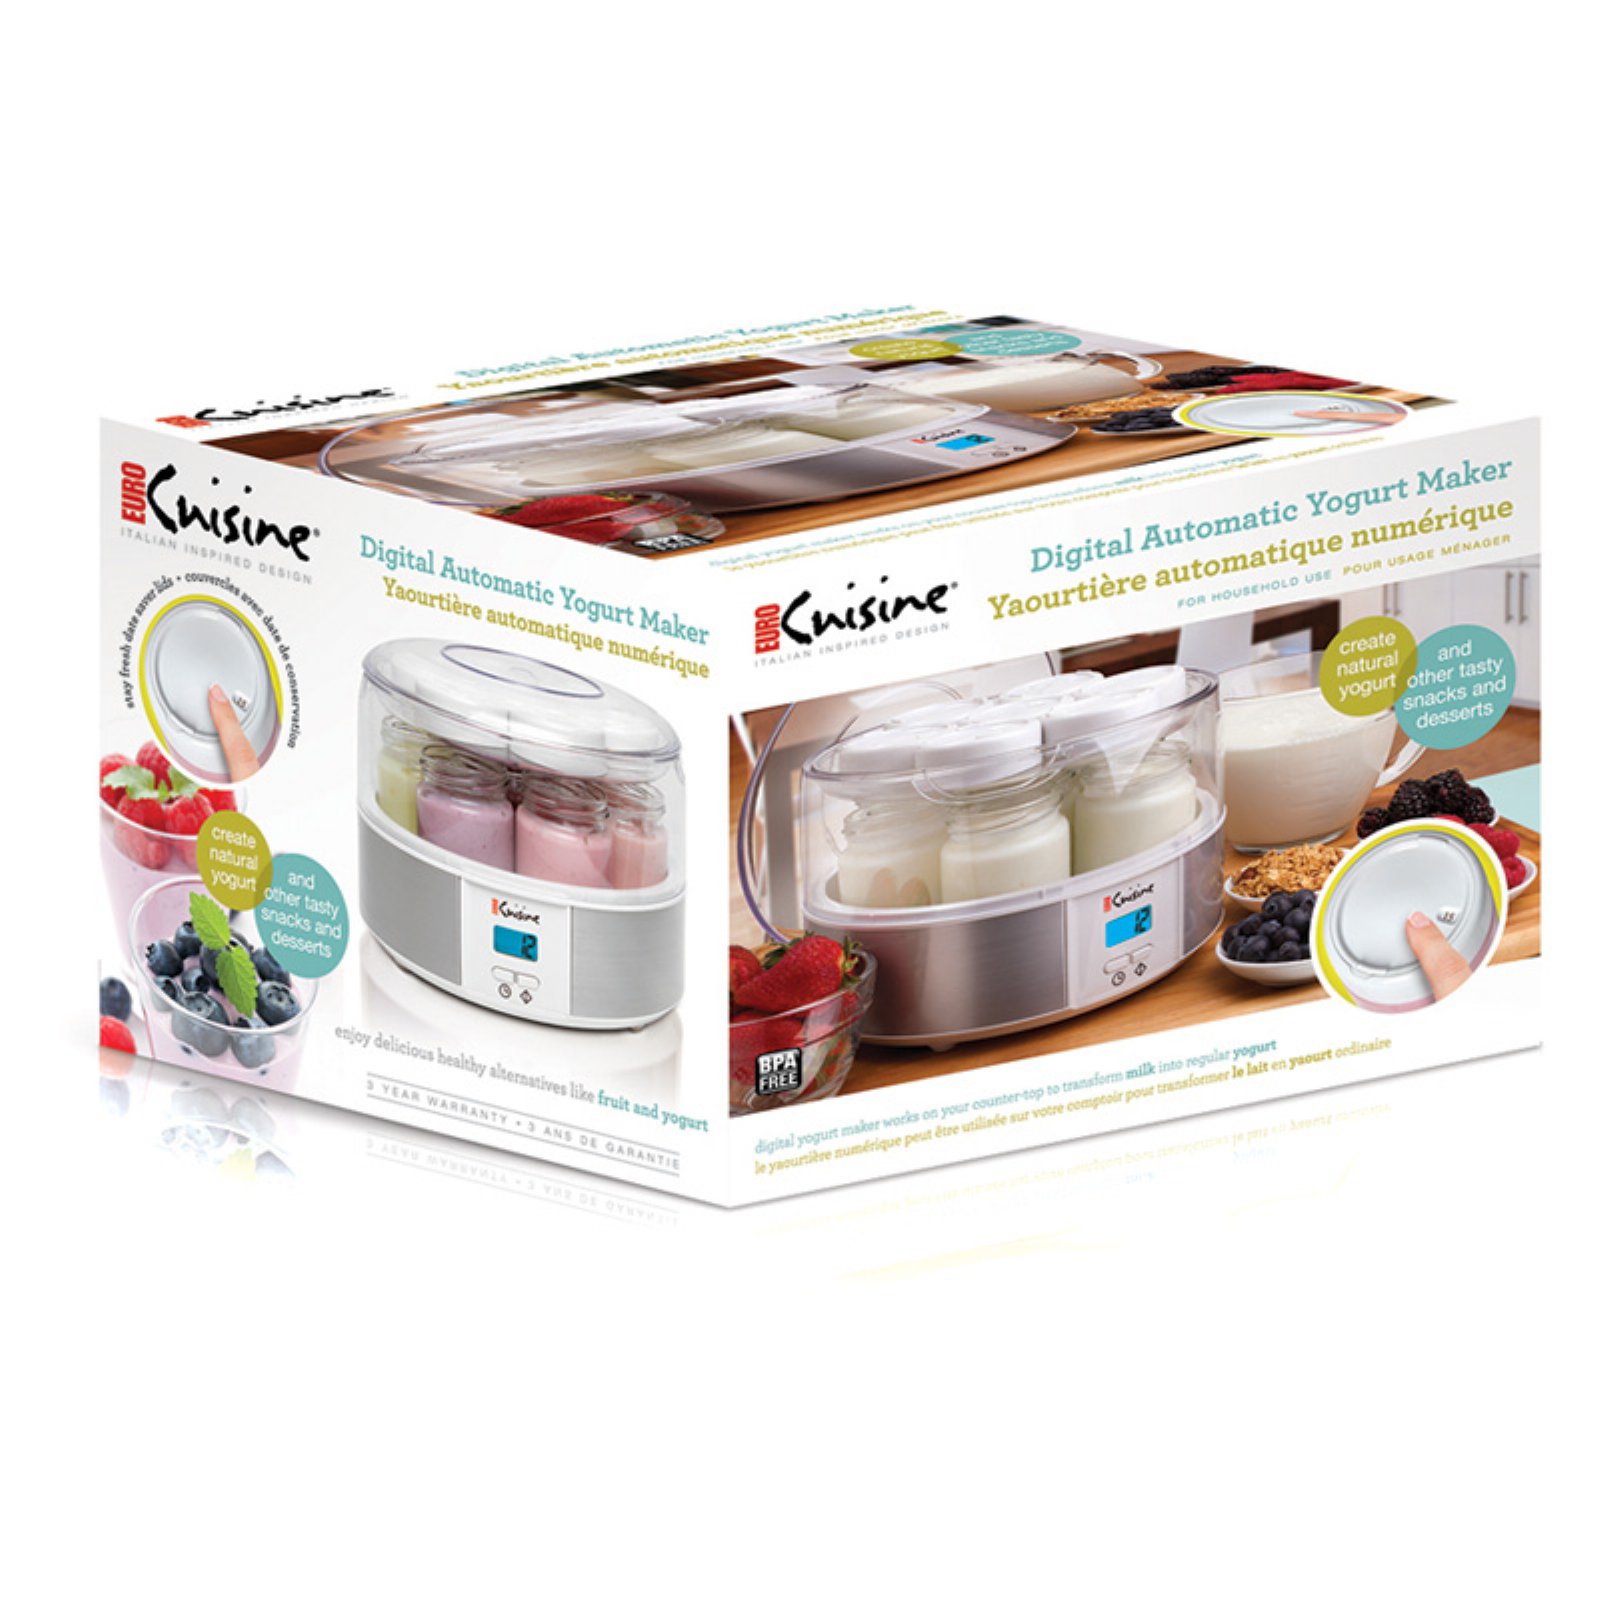 Euro Cuisine YMX650 Digital Yogurt Maker with 7 Glass Jars and 15 hours Timer - image 3 of 4